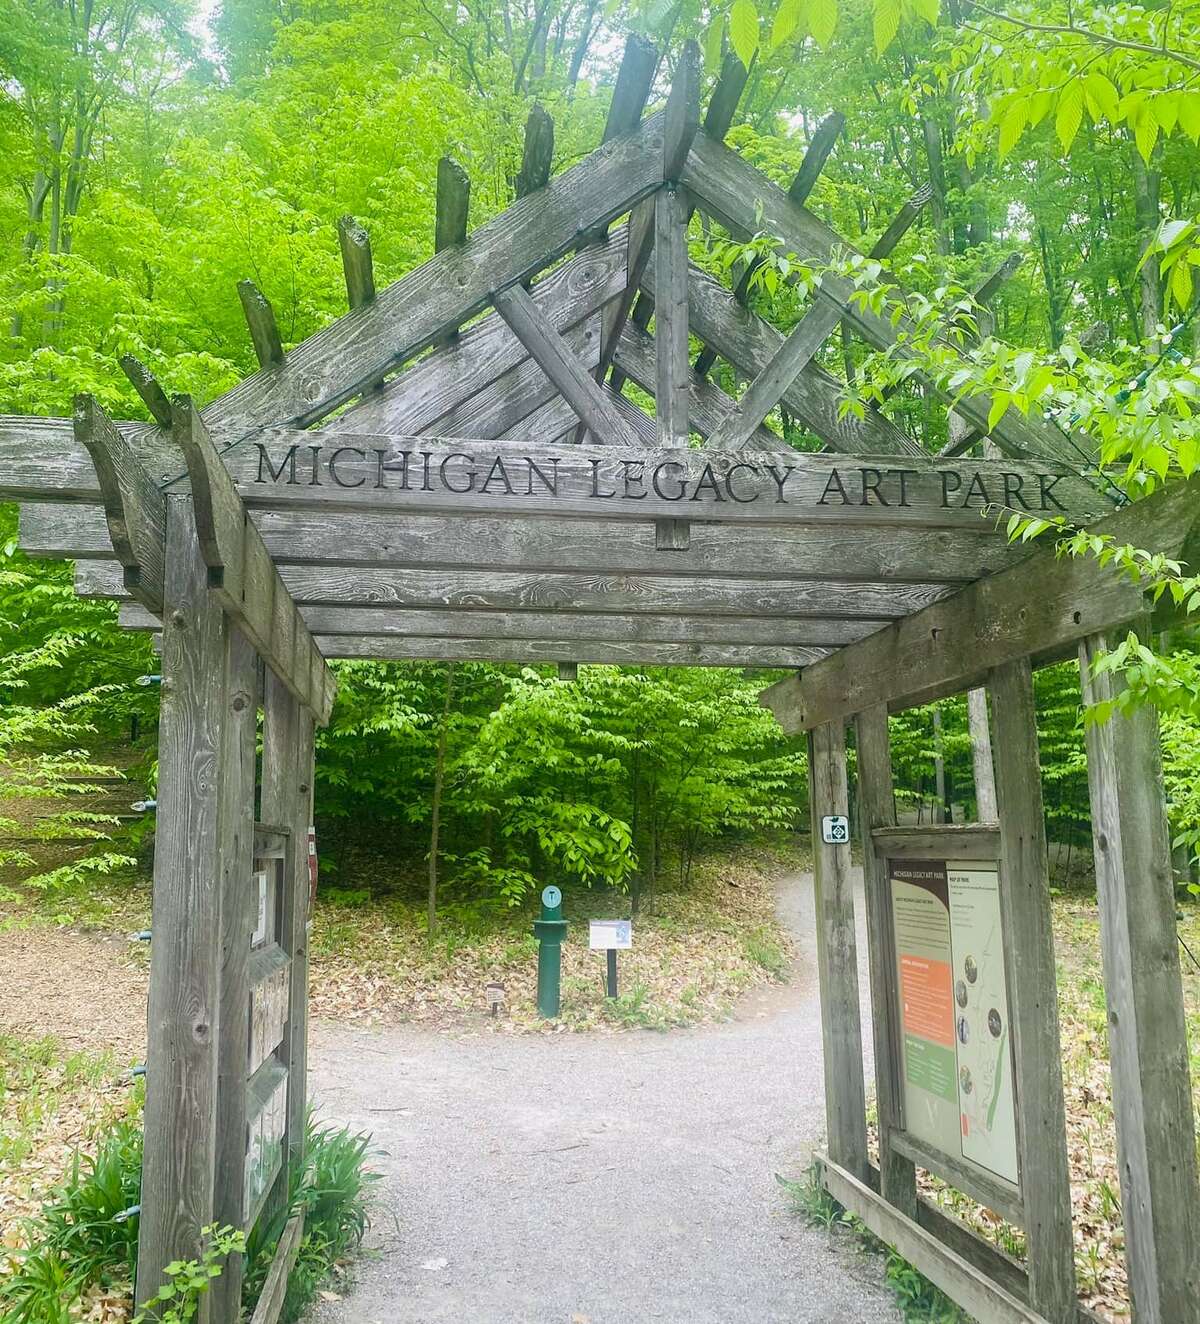 The Michigan Legacy Art Park will be hosting Fairies & Forts day to celebrate the coming summer. 